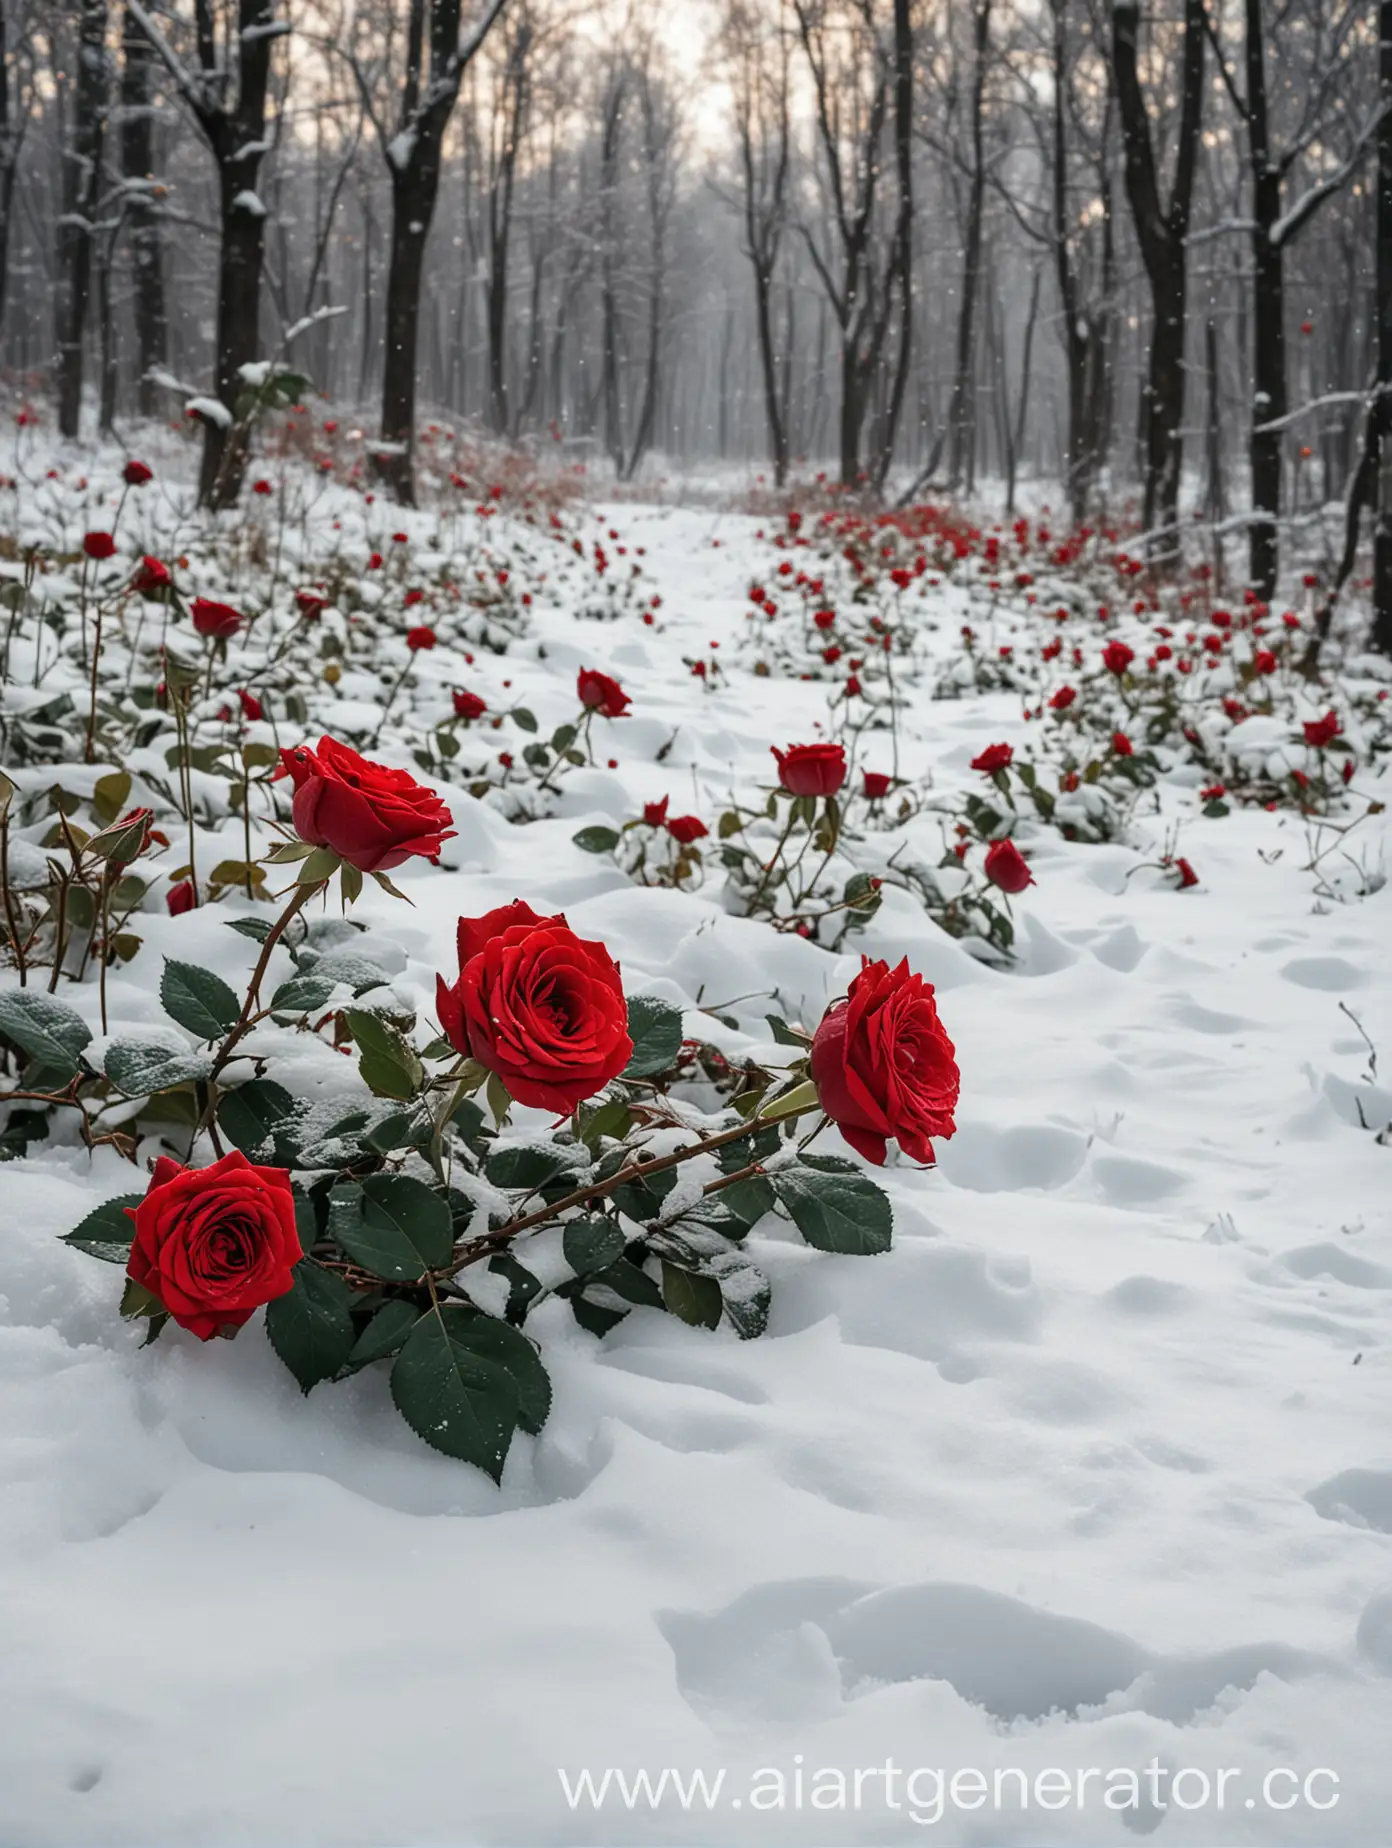 Red roses on the snow in the middle of the forest